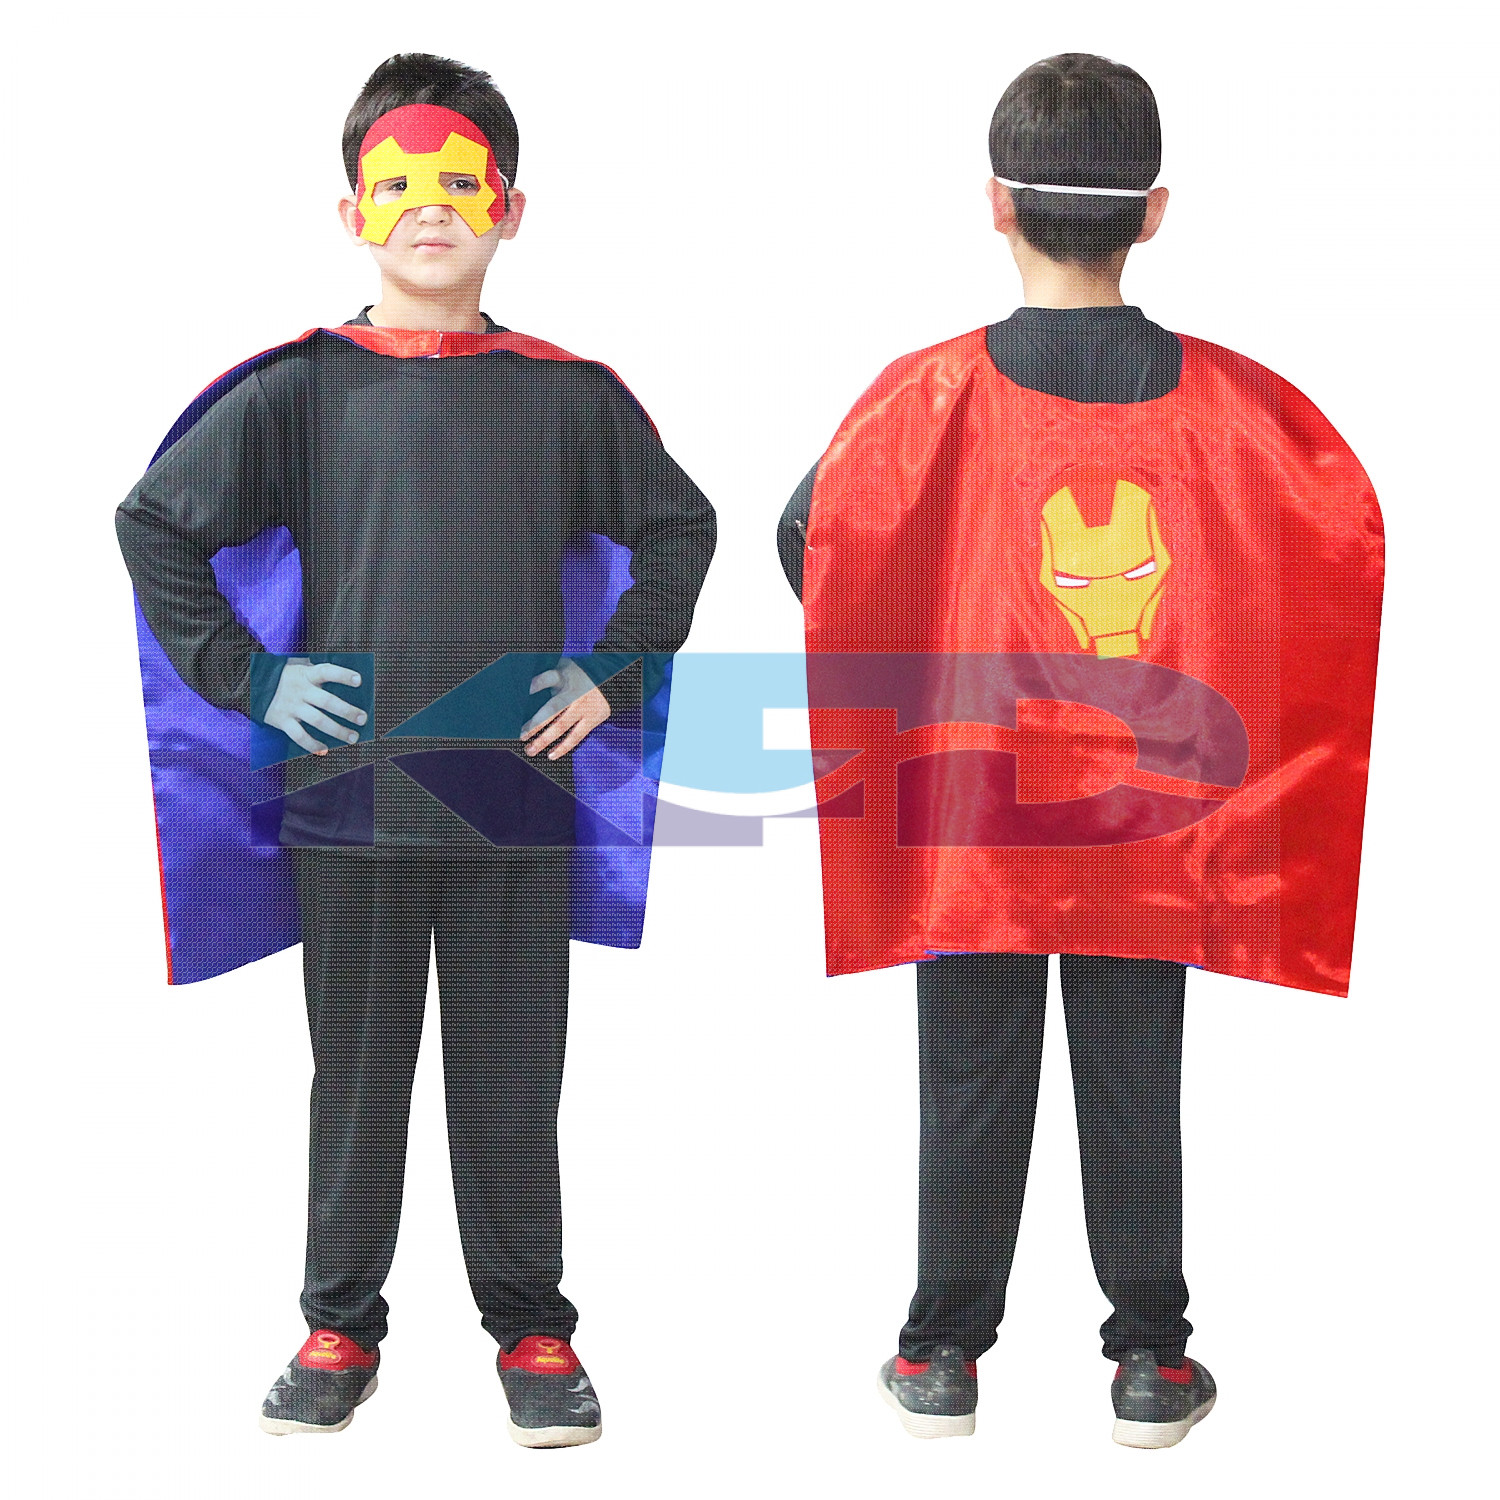 Ironman Robe For Kids/California Costume For kids/Superhero Robe For kids/For Kids Annual function/Theme Party/Competition/Stage Shows/Birthday Party Dress